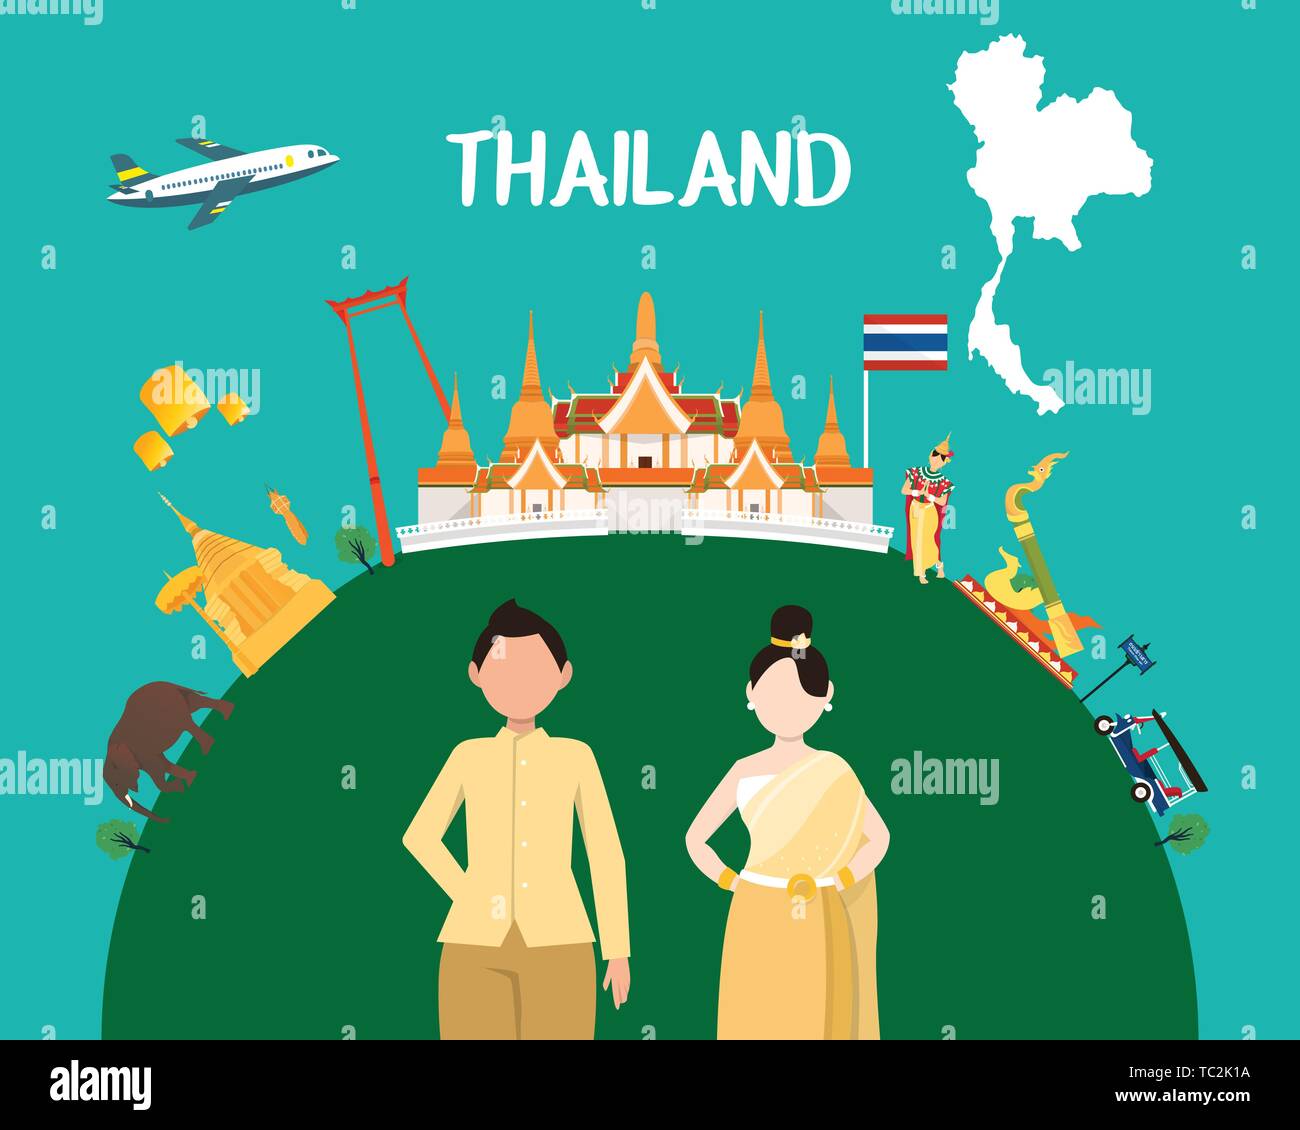 Traveling to Thailand by landmarks map illustration Stock Vector